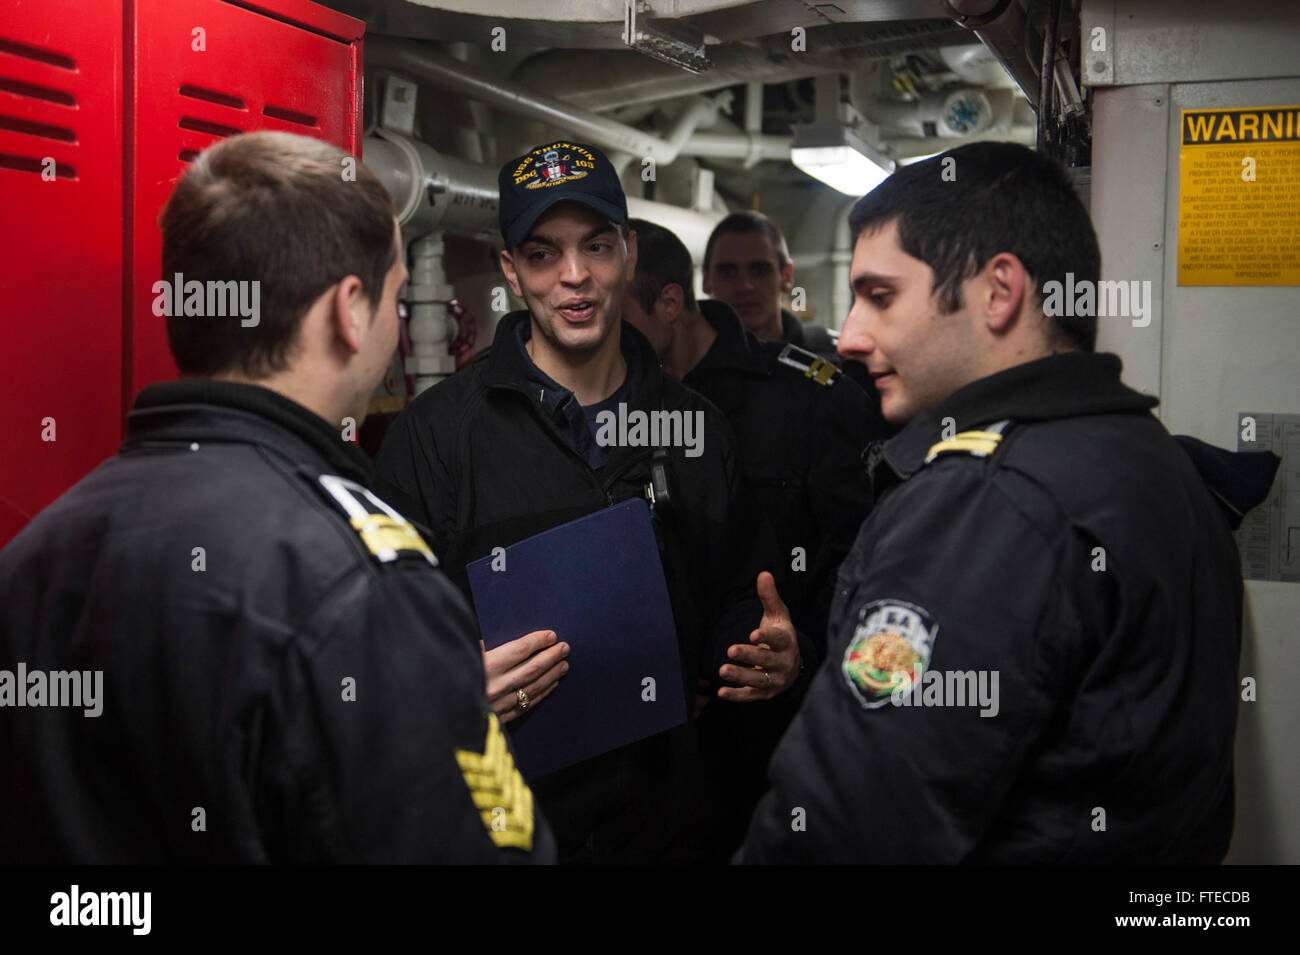 BLACK SEA (March 19, 2014) - Lt. j.g. Joseph Testa, of Phlugerville, Texas, gives Bulgarian Naval Academy cadets a tour of the Arleigh Burke-class guided-missile destroyer USS Truxtun (DDG 103). The Truxtun is deployed as part of the George H. W. Bush Strike Group on a scheduled deployment supporting maritime security operations and theater security cooperation efforts in the U.S. 6th Fleet area of operations. (U.S. Navy photo by Mass Communication Specialist 3rd Class Scott Barnes/Released) Stock Photo